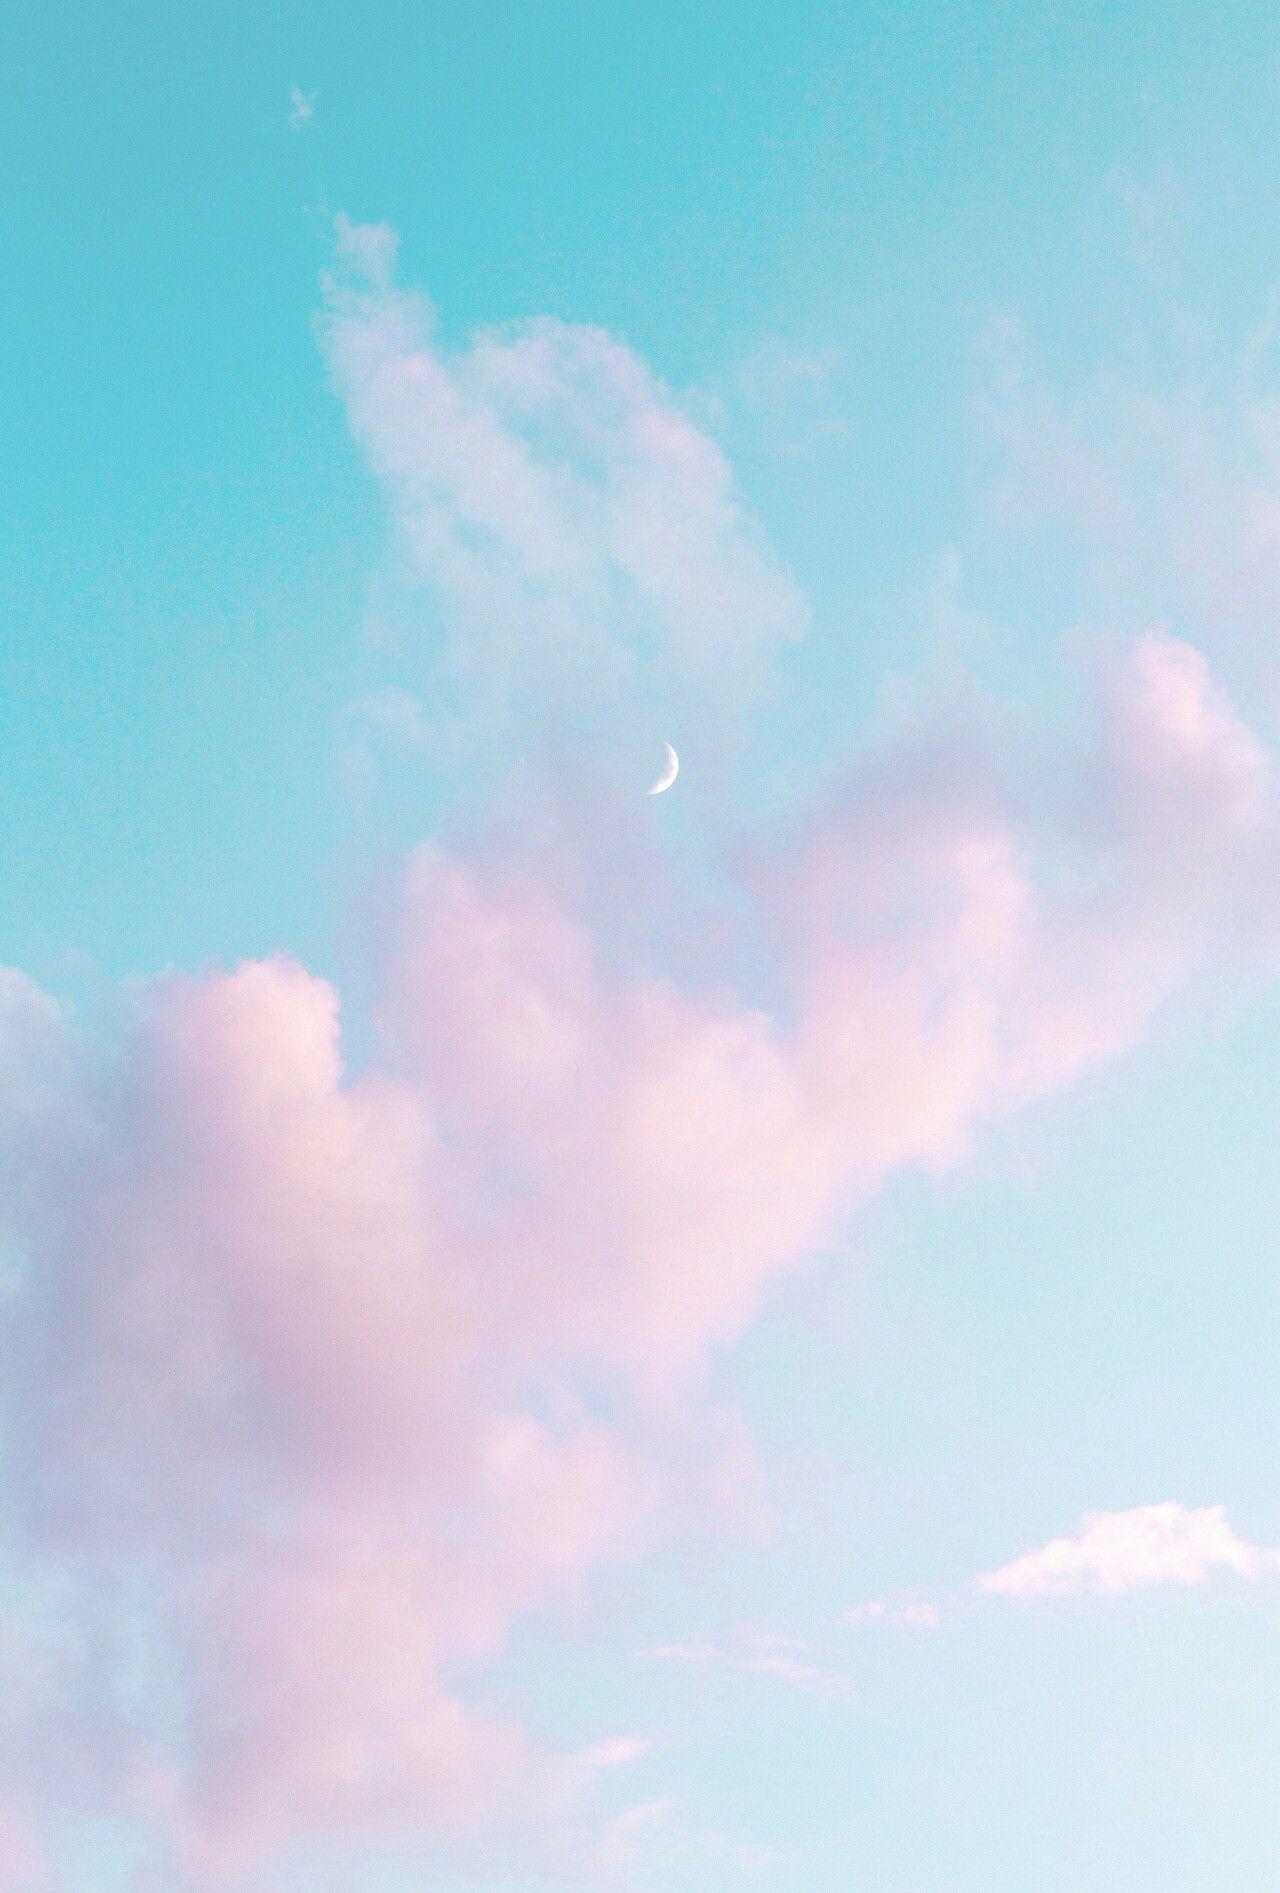 Hello loves have a beautiful day. ❤. Sky aesthetic